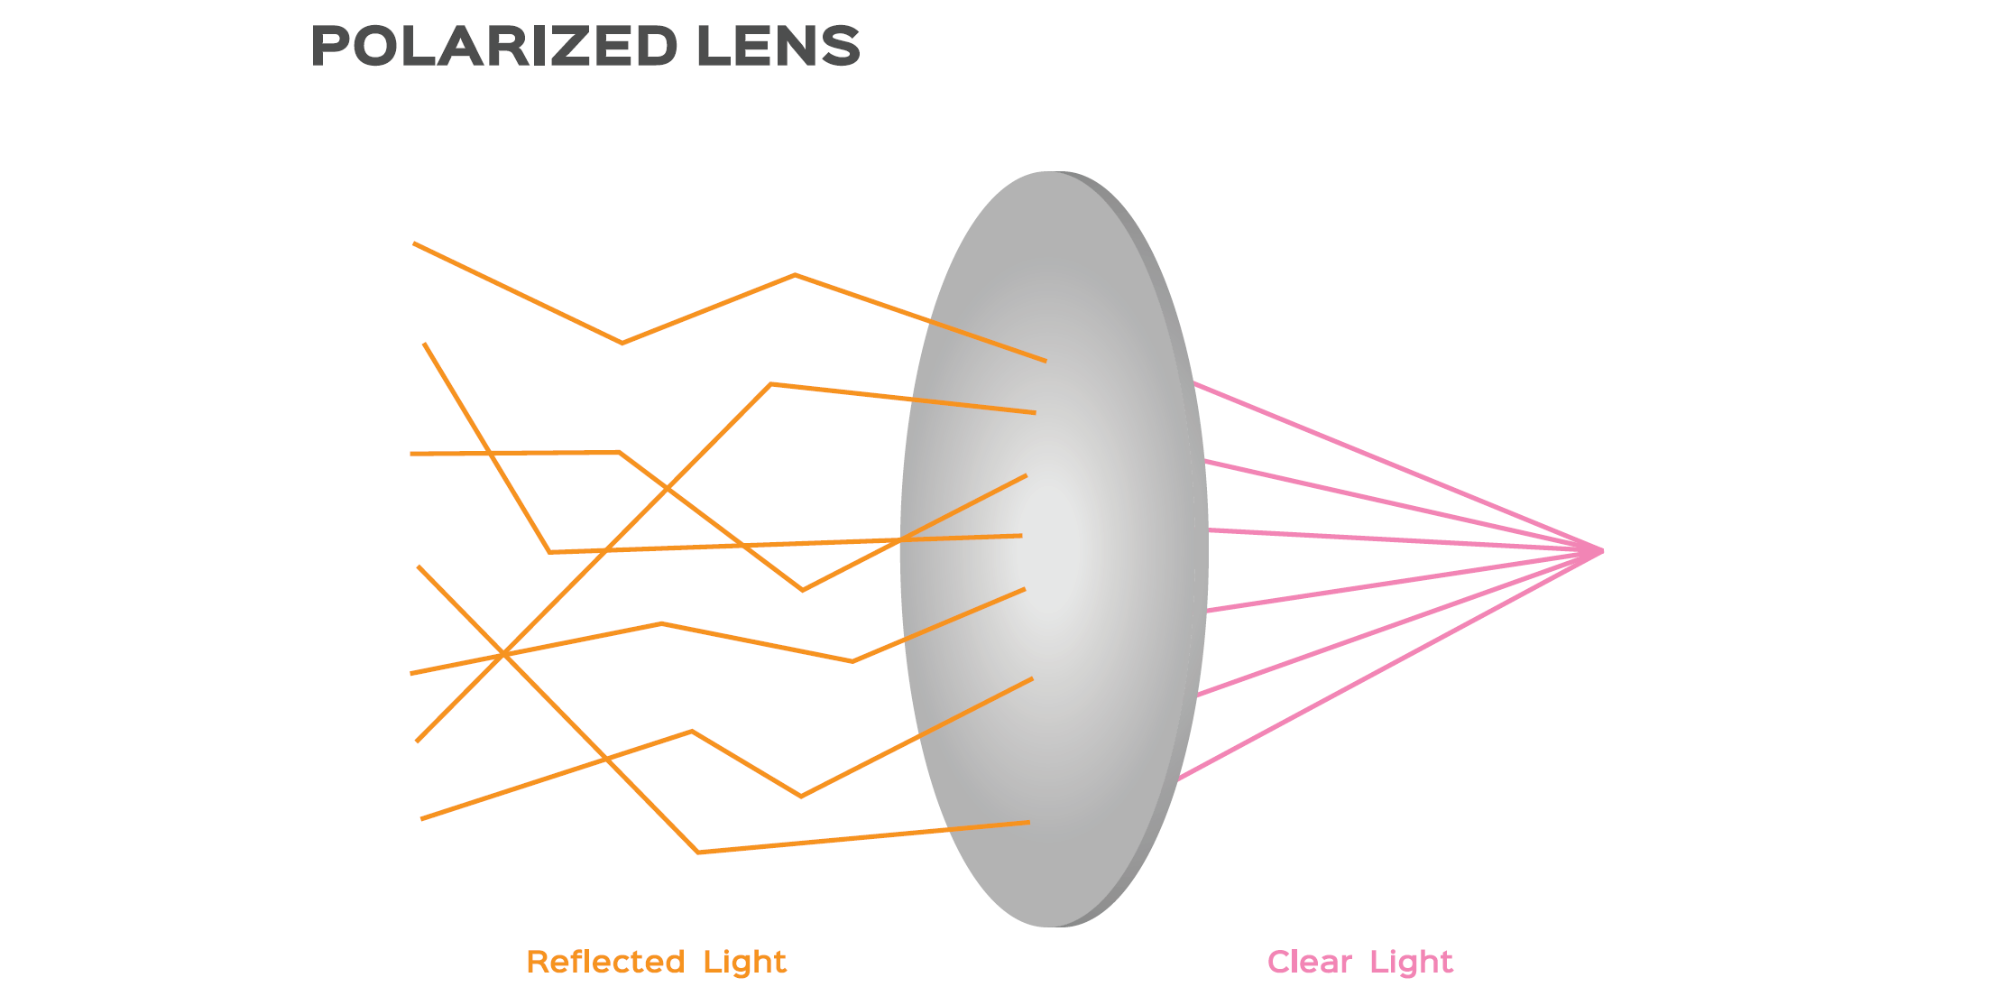 The science of Polarized Lens